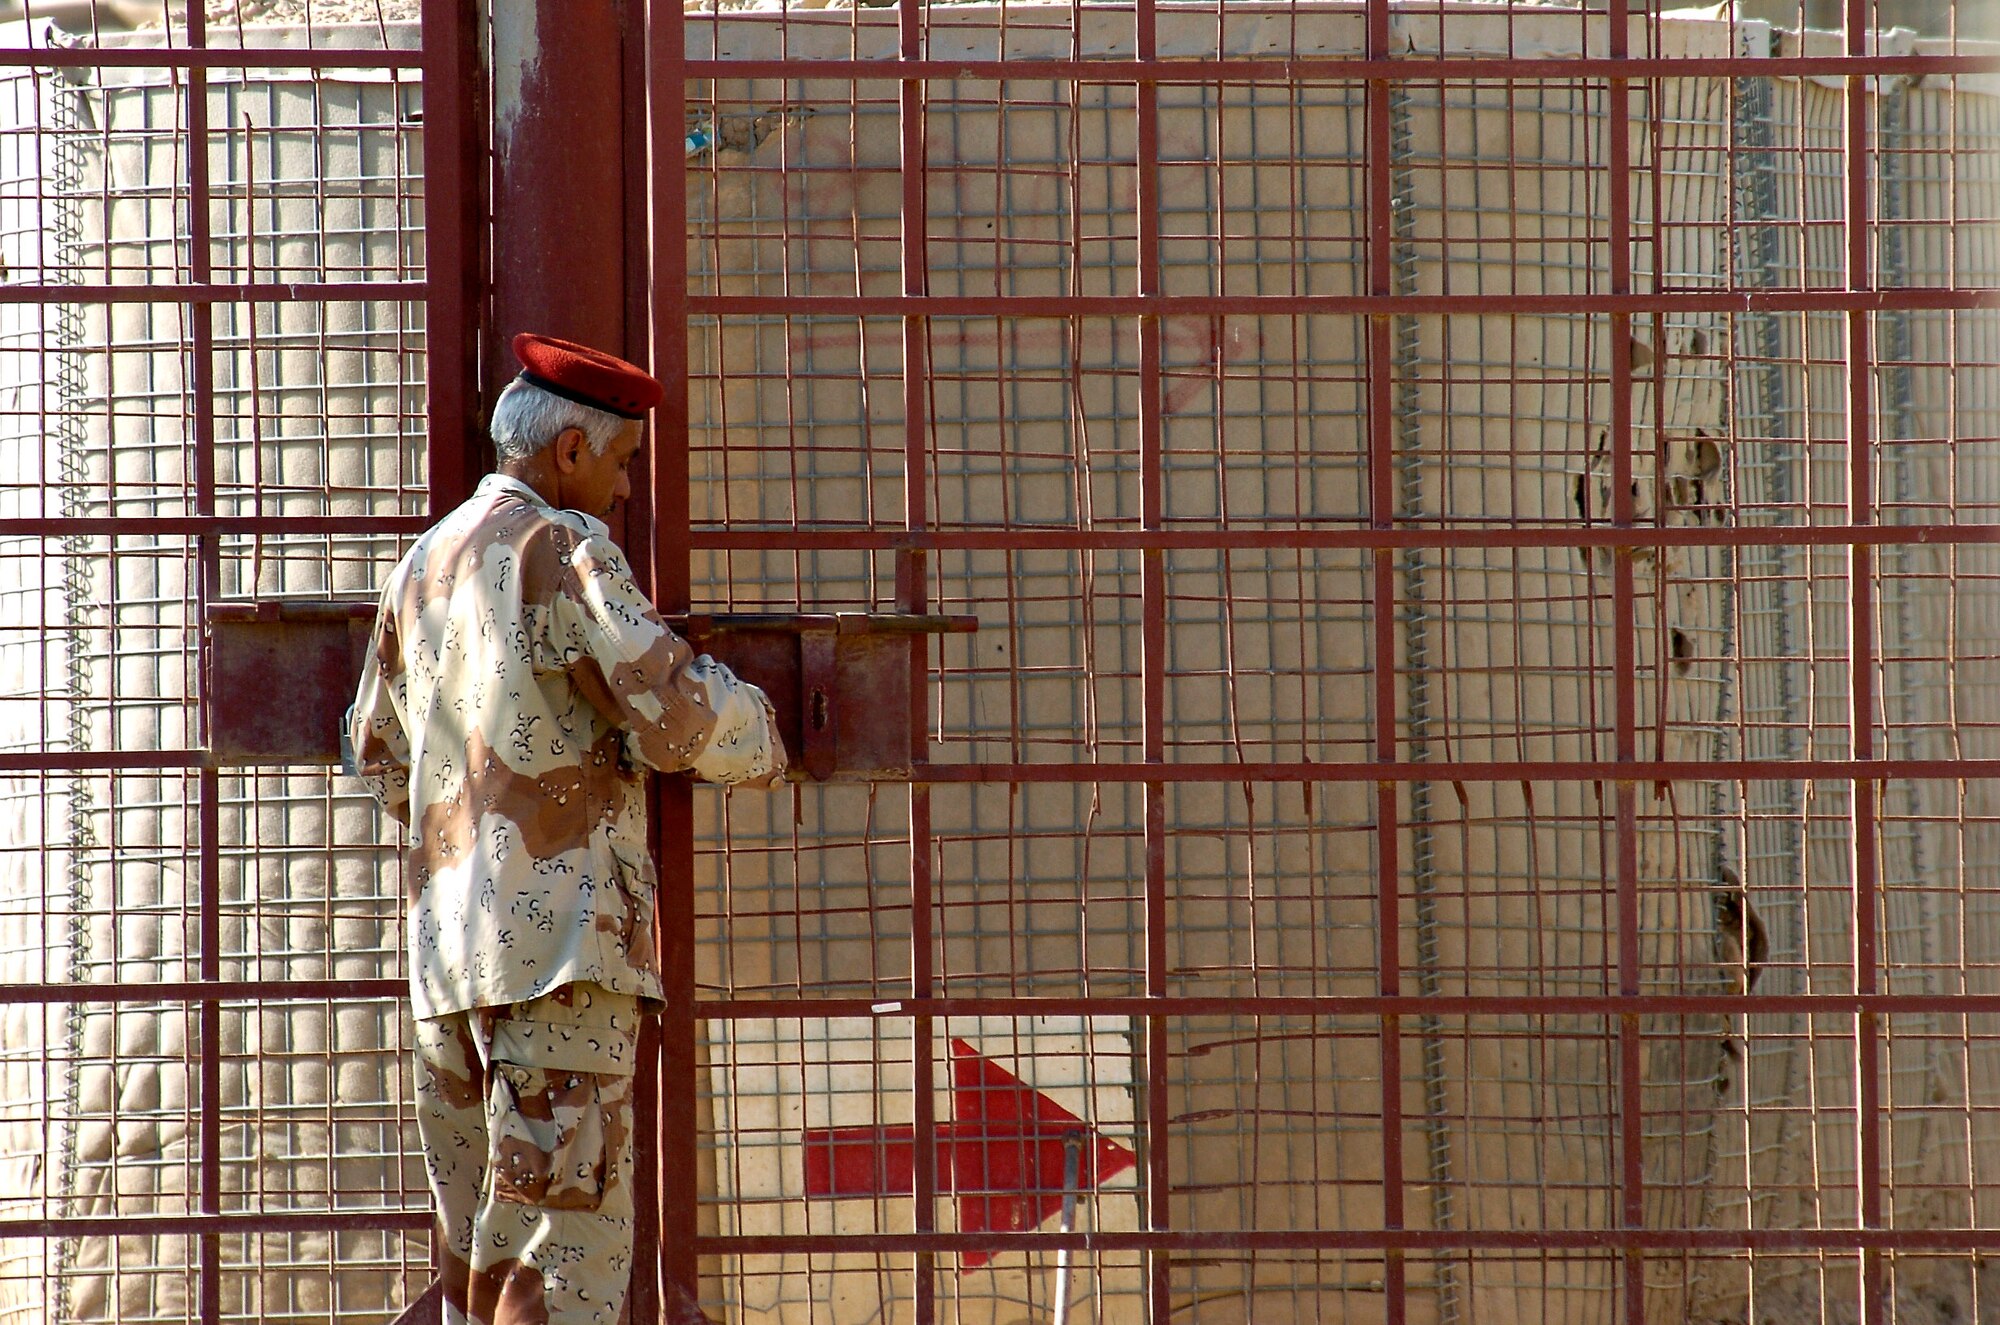 An Iraqi soldier locks the gate at Ar Rasheed Base, Iraq, on Thursday, May 25, 2006. The soldier is with the 1st Iraqi Army Division/Iraqi Intervention Forces, which provide defense for the compound. Five security forces Airmen and their Army commander live on the base and advise the Iraqi Army on base defense procedures. (U.S. Air Force photo/Senior Airman Brian Ferguson)
